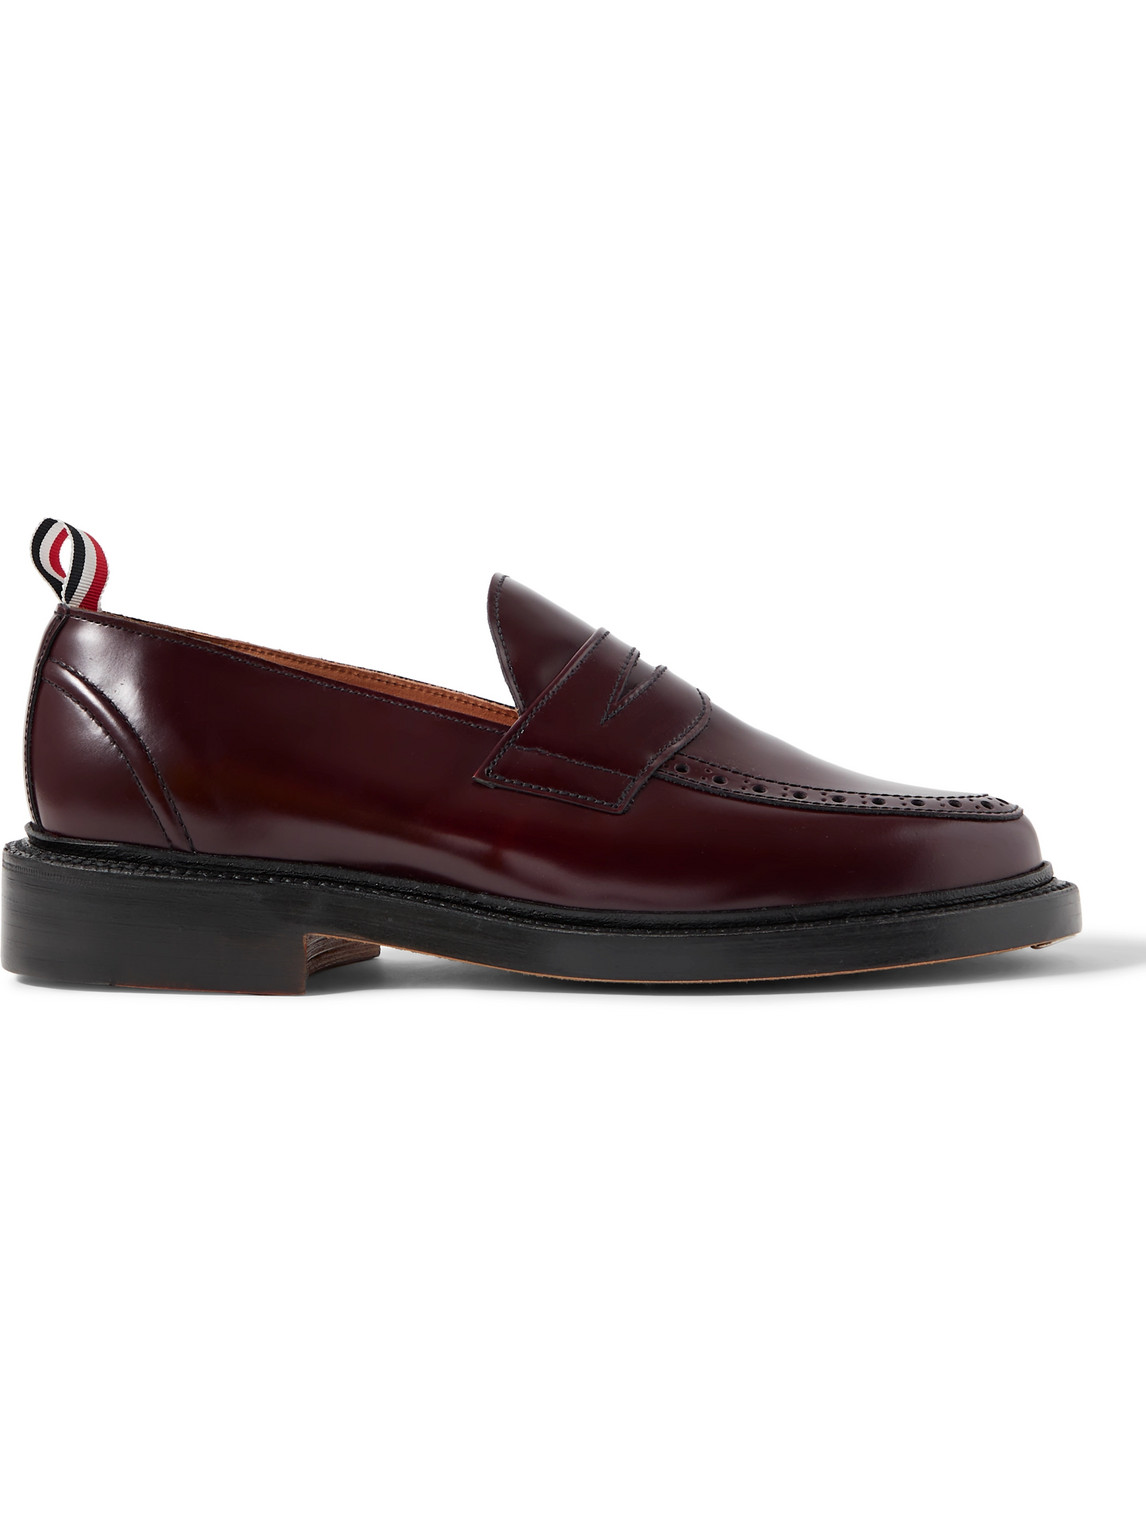 Thom Browne Grosgrain-Trimmed Glossed-Leather Penny Loafers